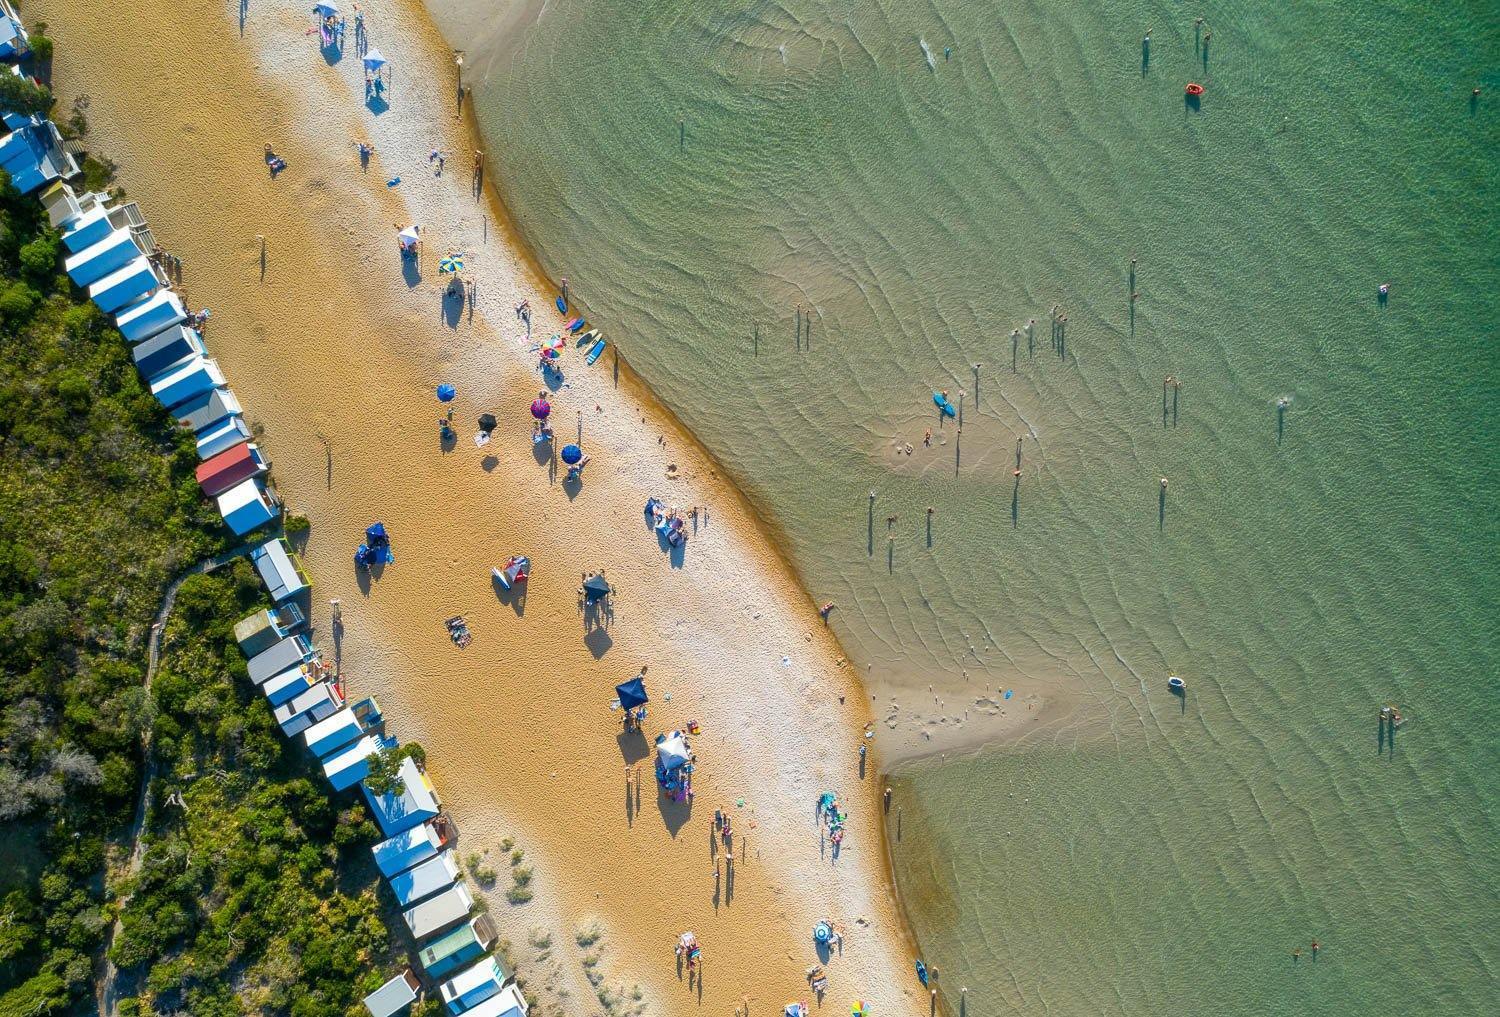 Aerial view of a calm beach with some people and colorful huts outside, Summer Bathers Mt Martha - Mornington Peninsula VIC